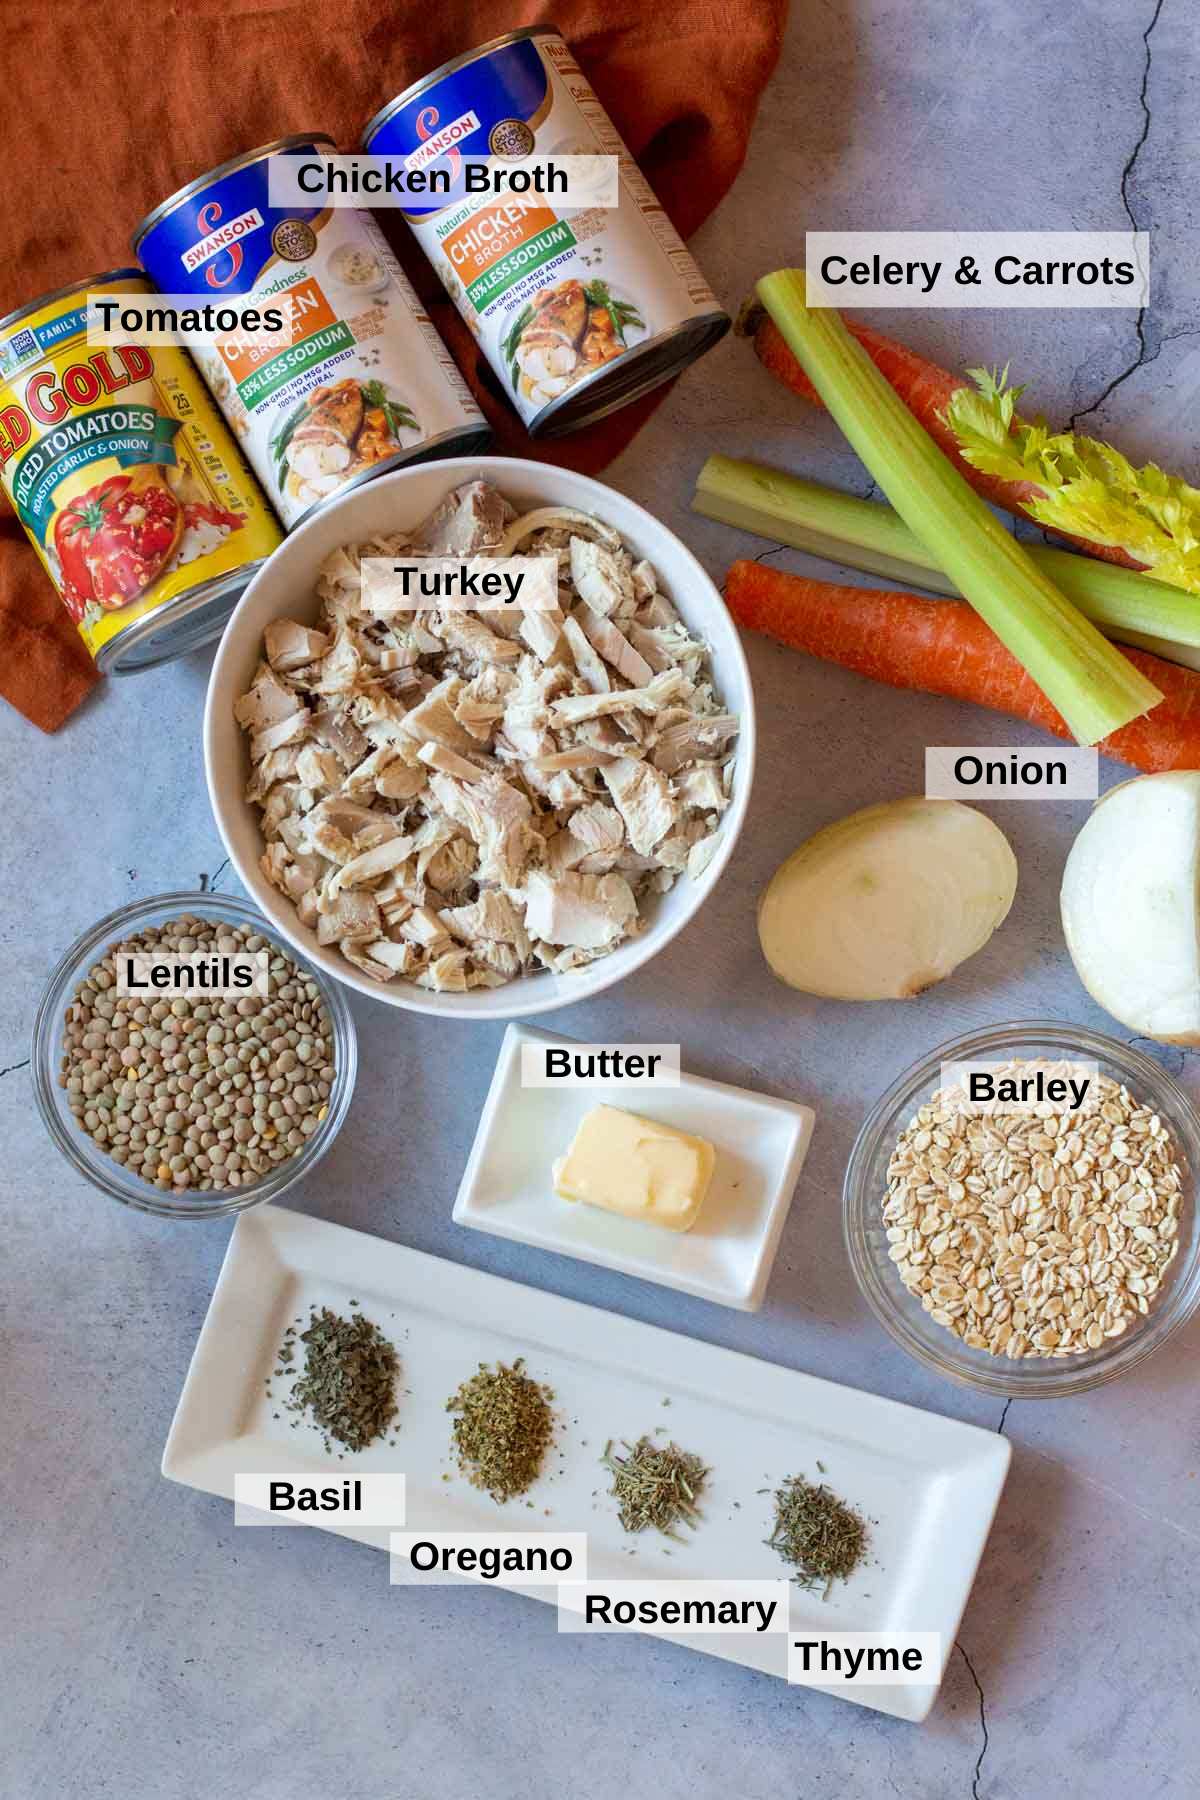 Ingredients to make lentil soup with turkey.